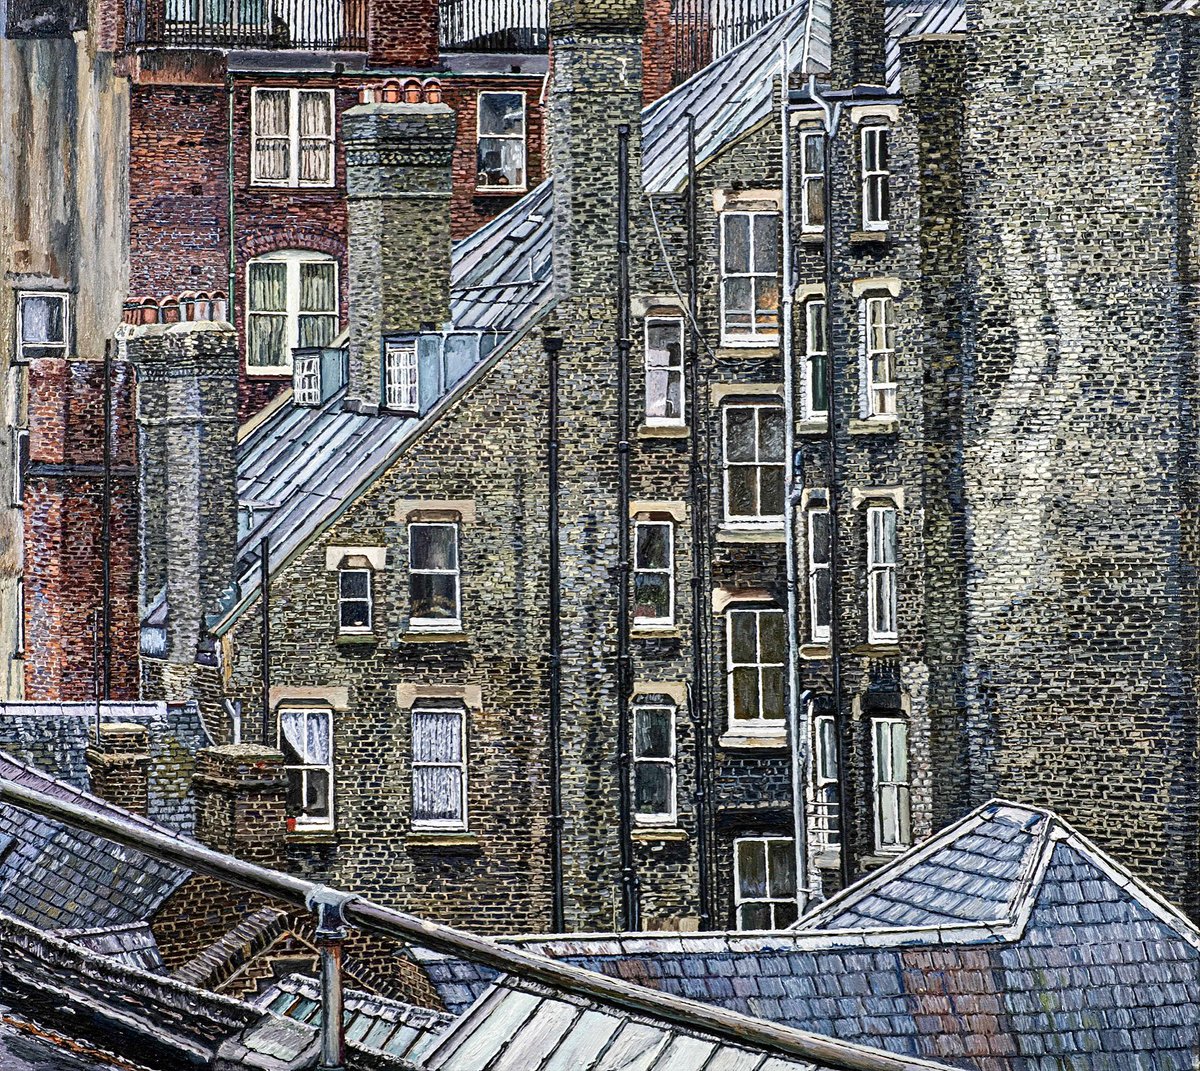 View from Panther House by Melissa Scott Miller (b. 1959)